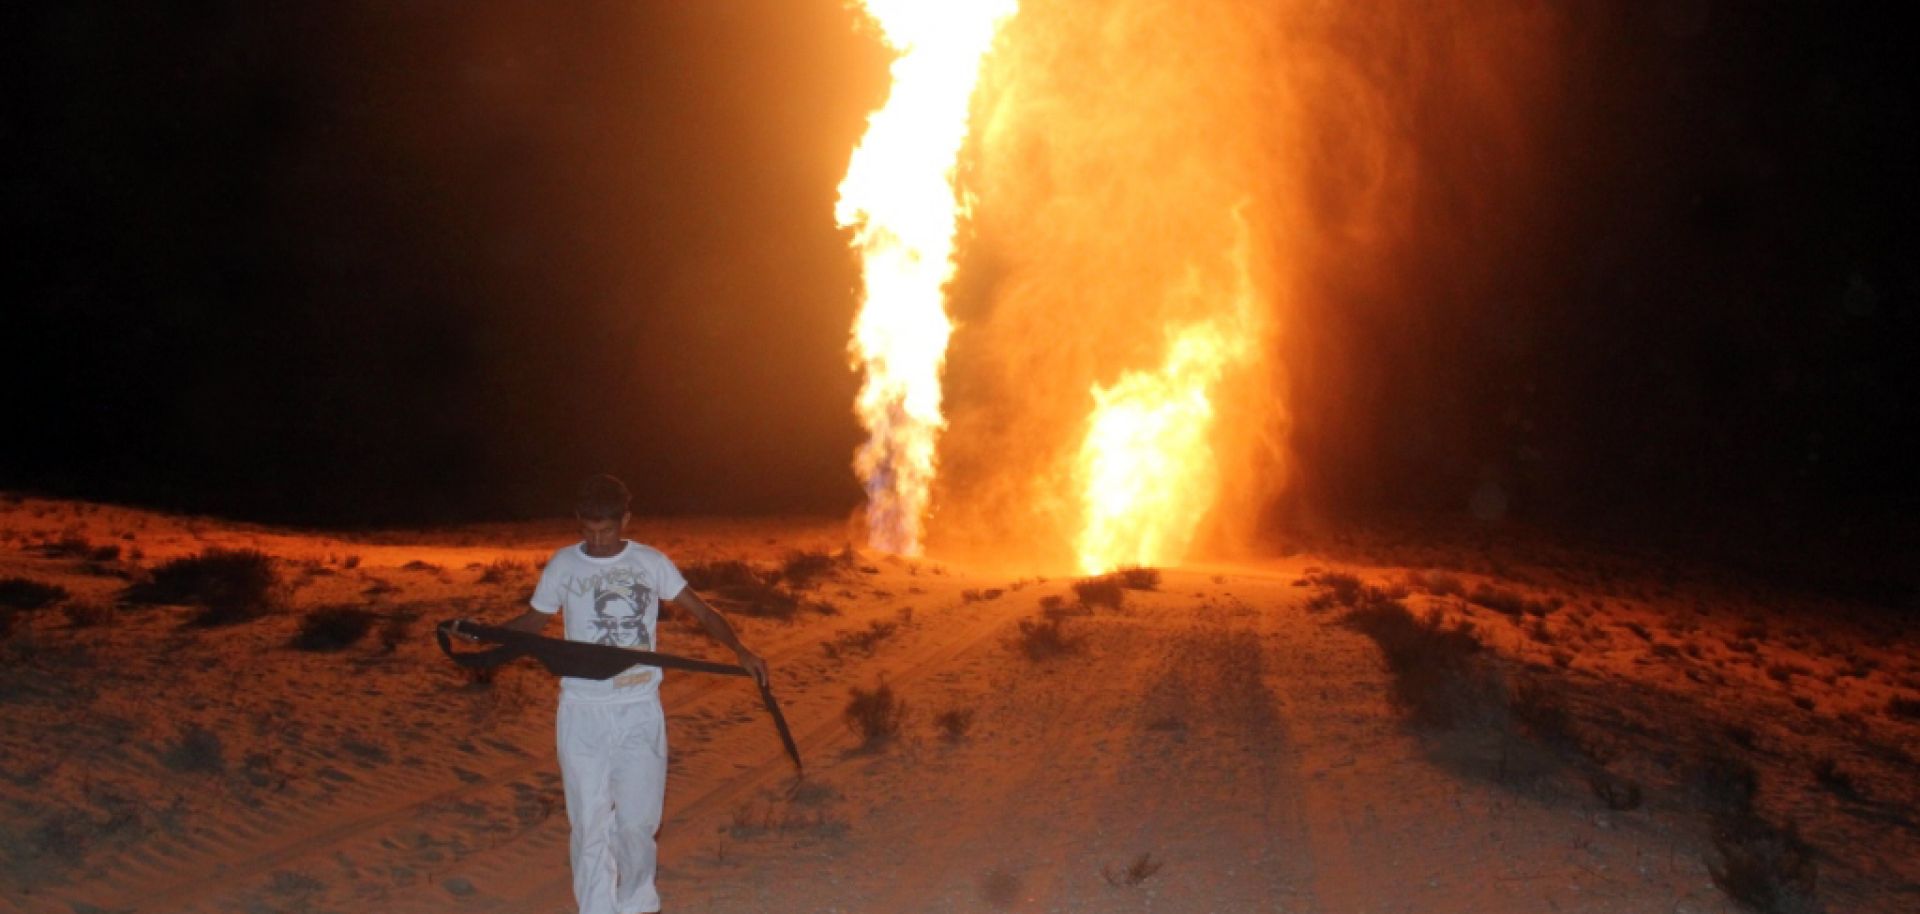 An Egyptian man walks in front of an enormous flame by a gas pipeline.